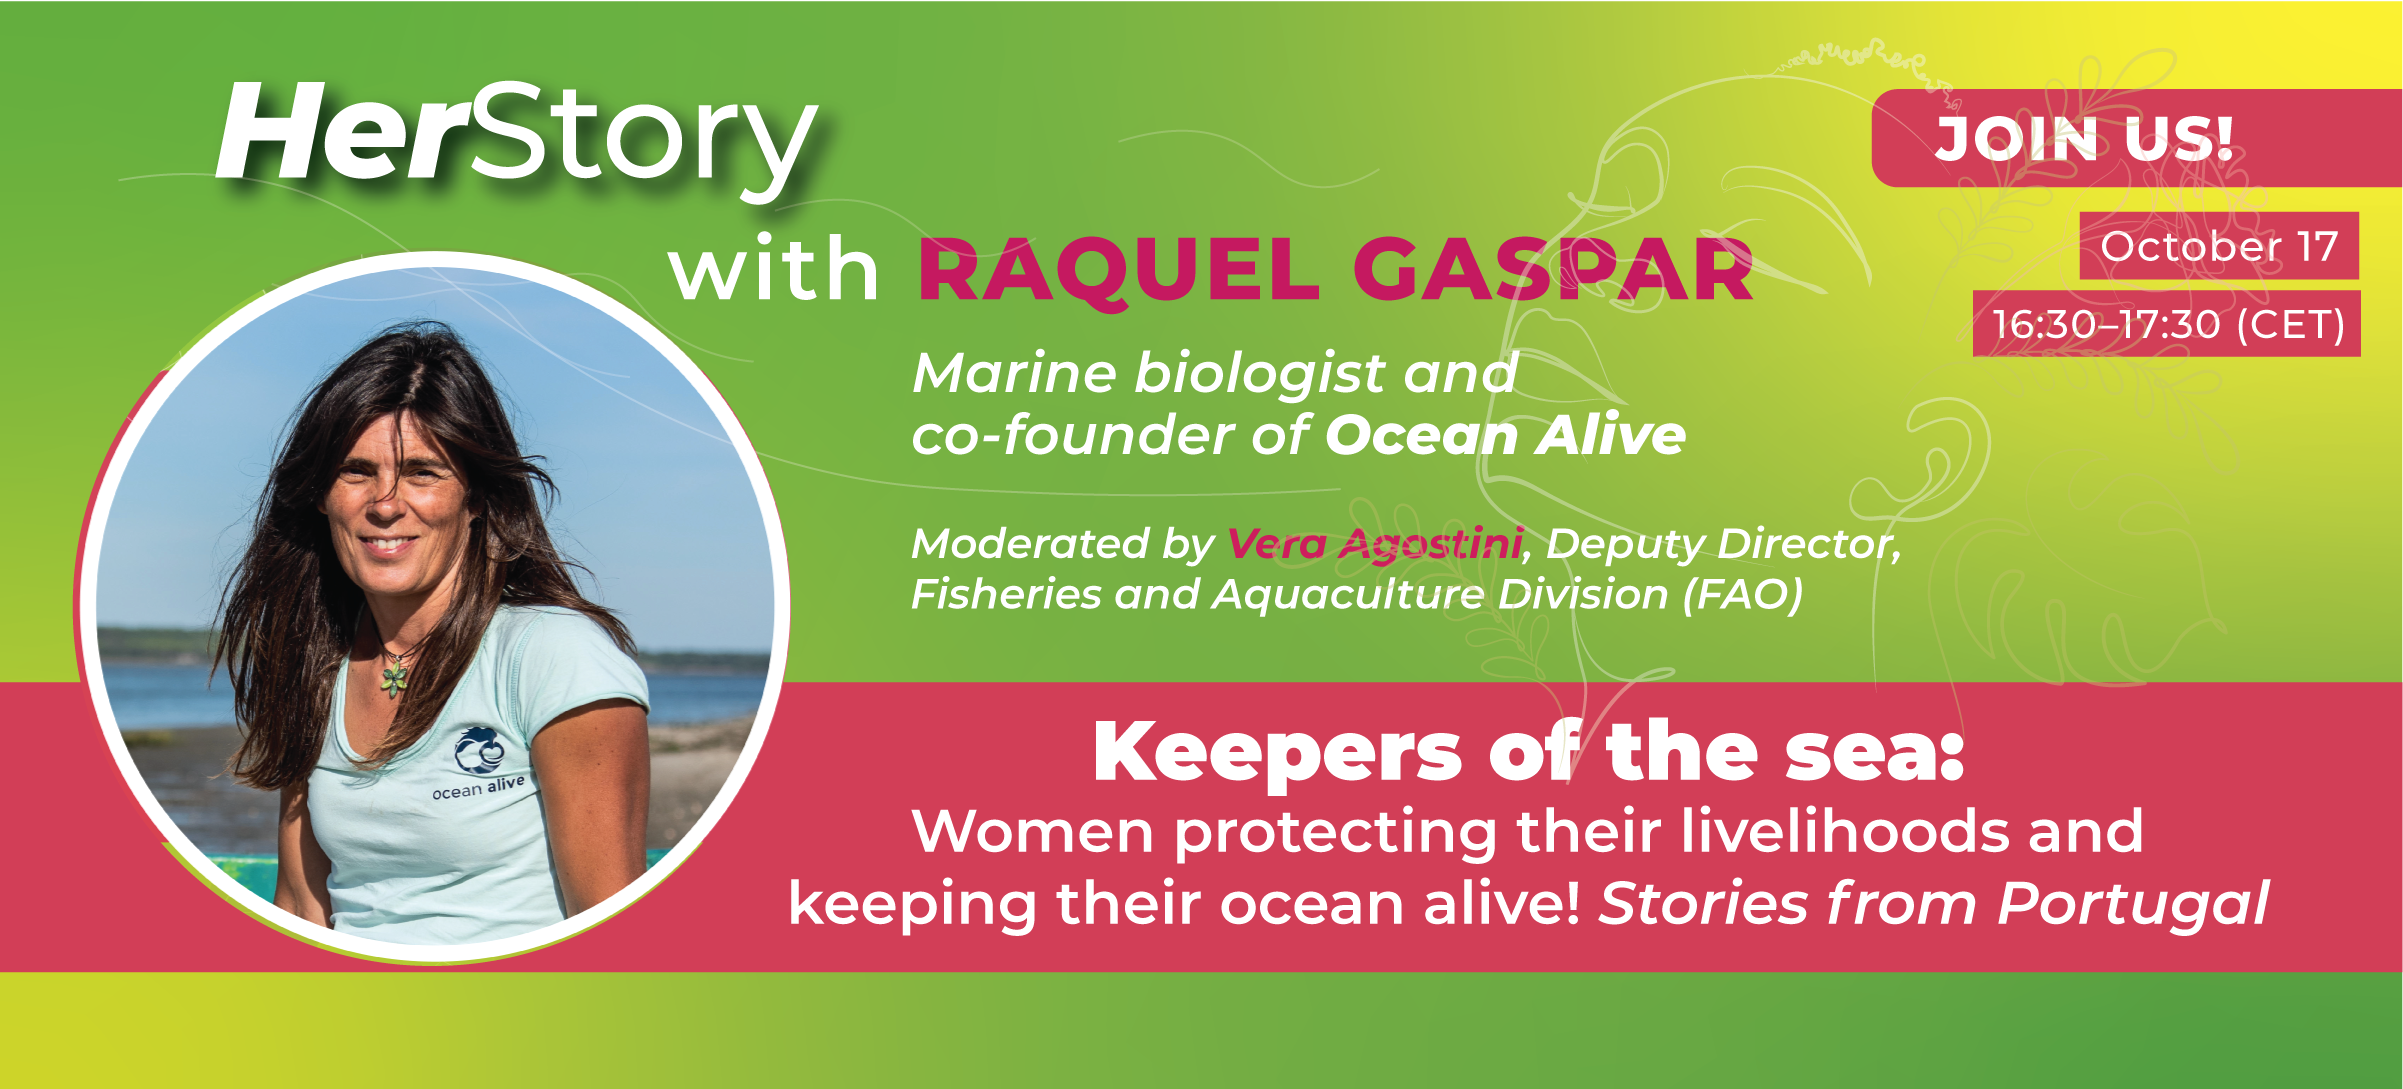 A conversation with Raquel Gaspar, co-founder of Ocean Alive: Developing women’s leadership in ocean conservation'